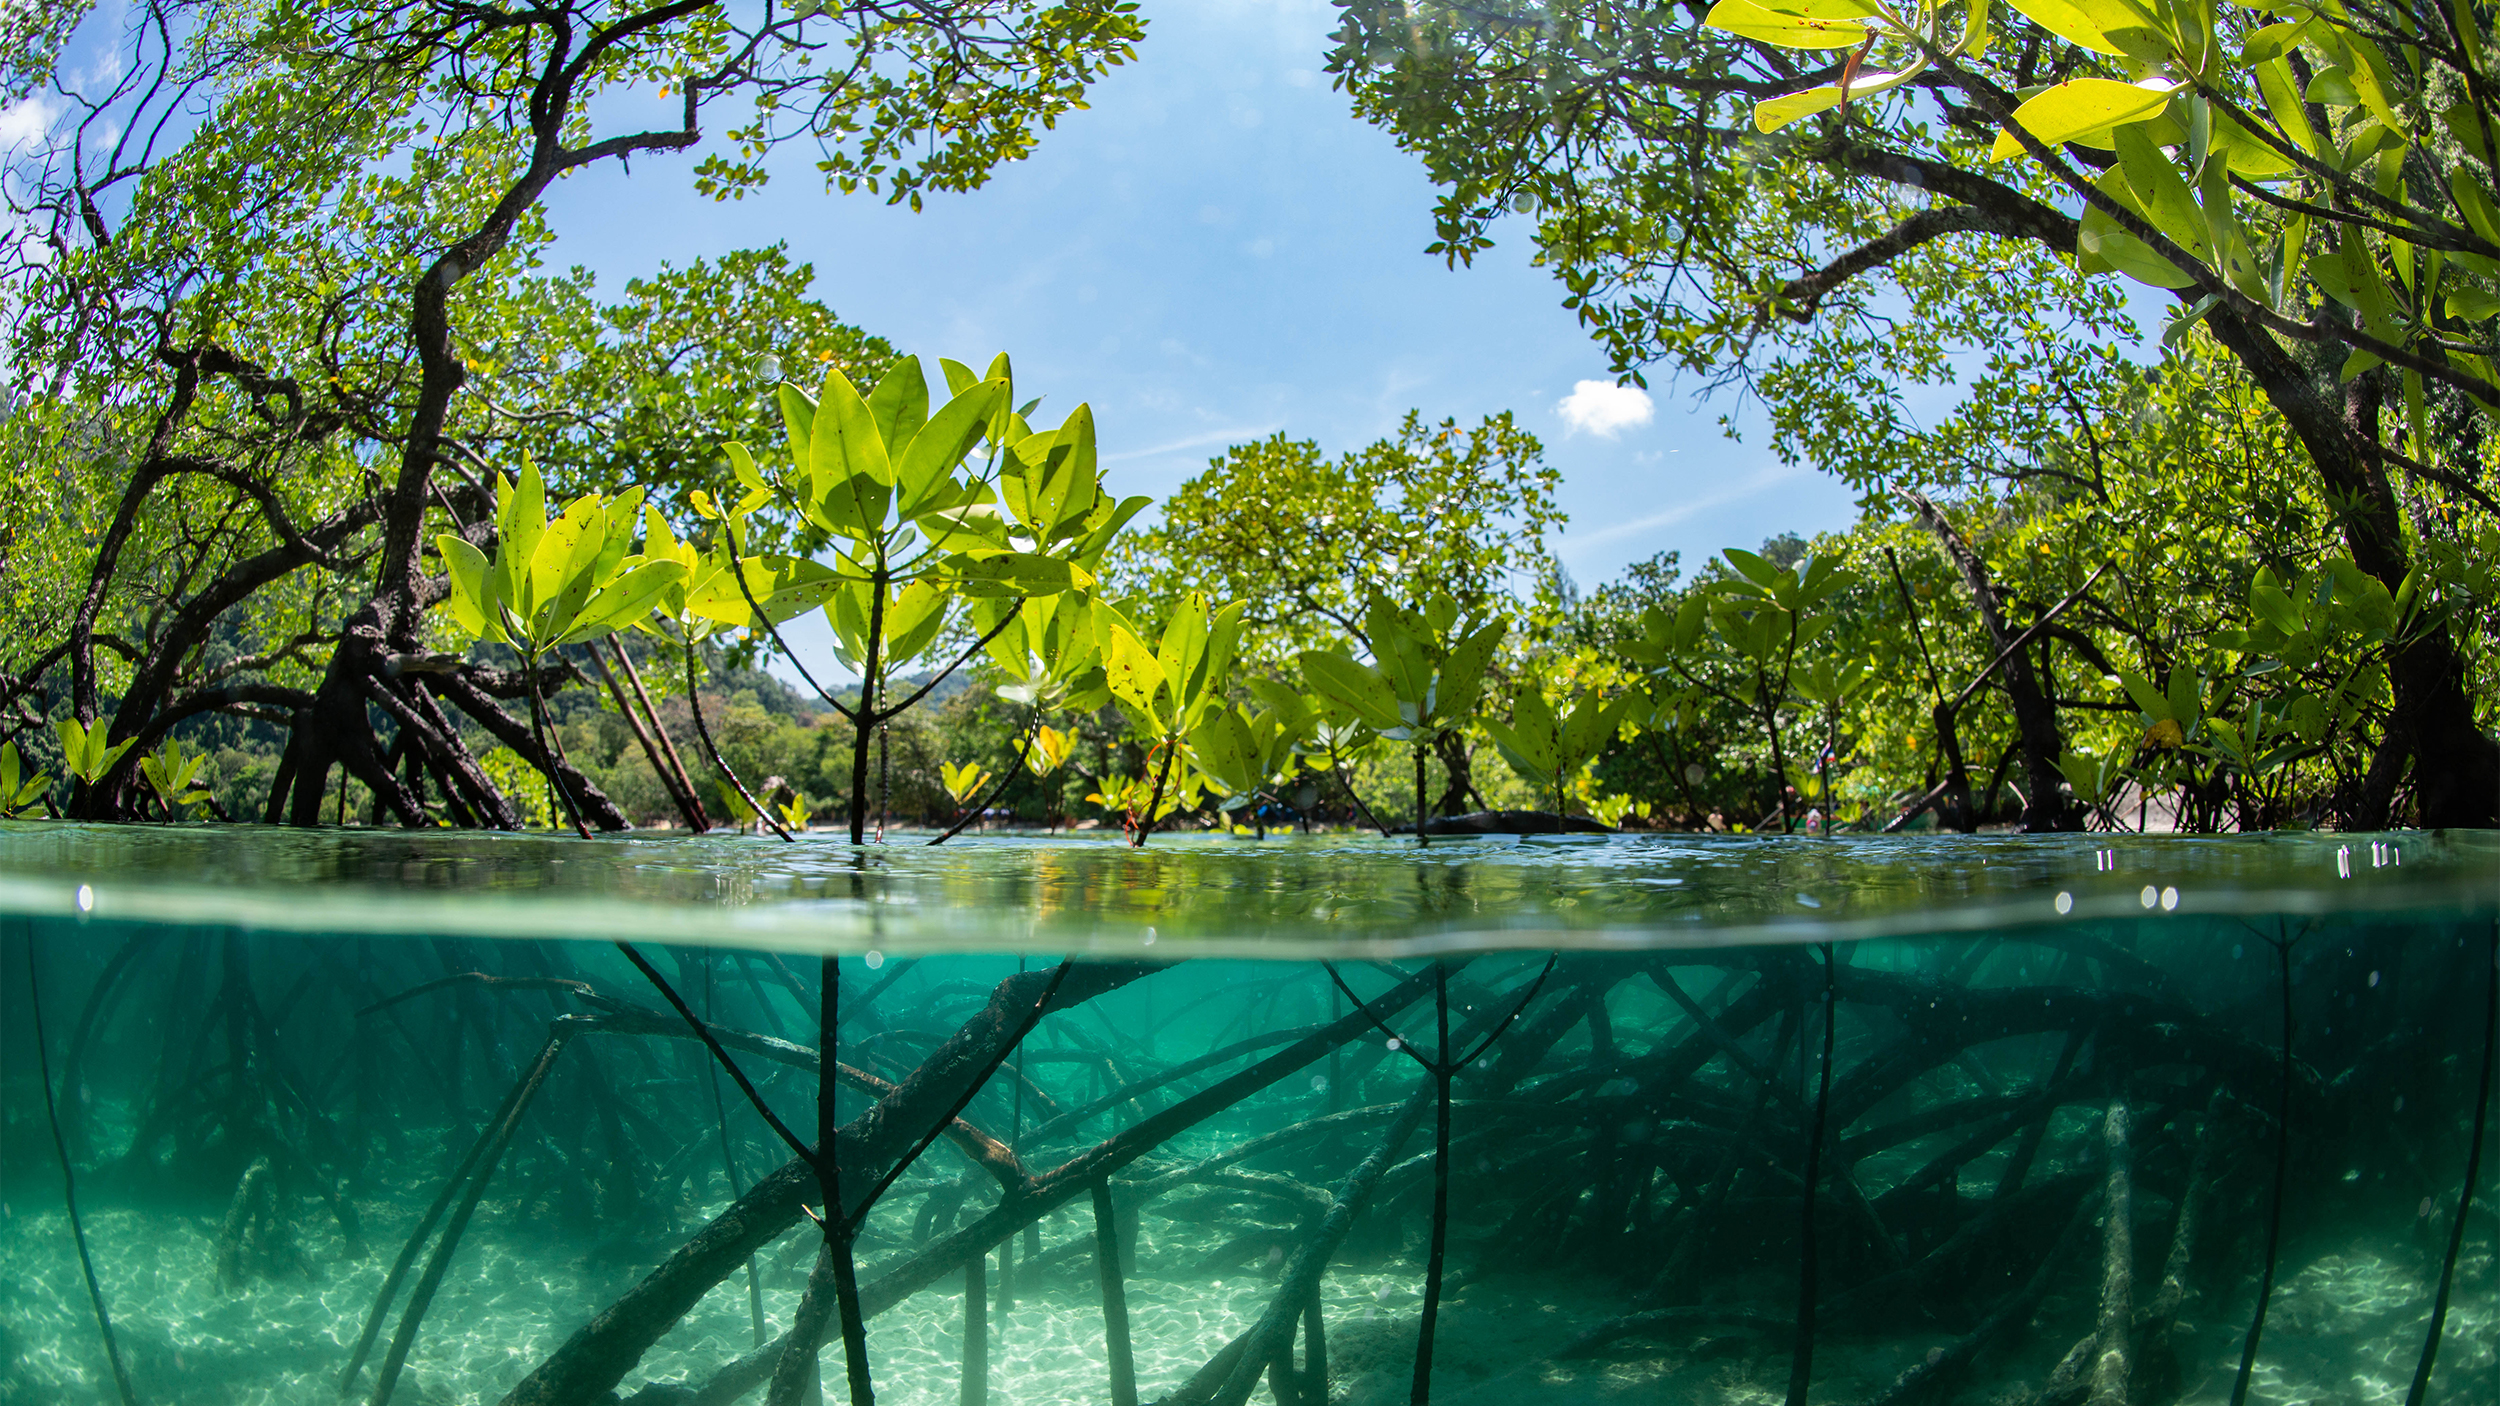 Mangrove forest showing the trunk and roots underwater